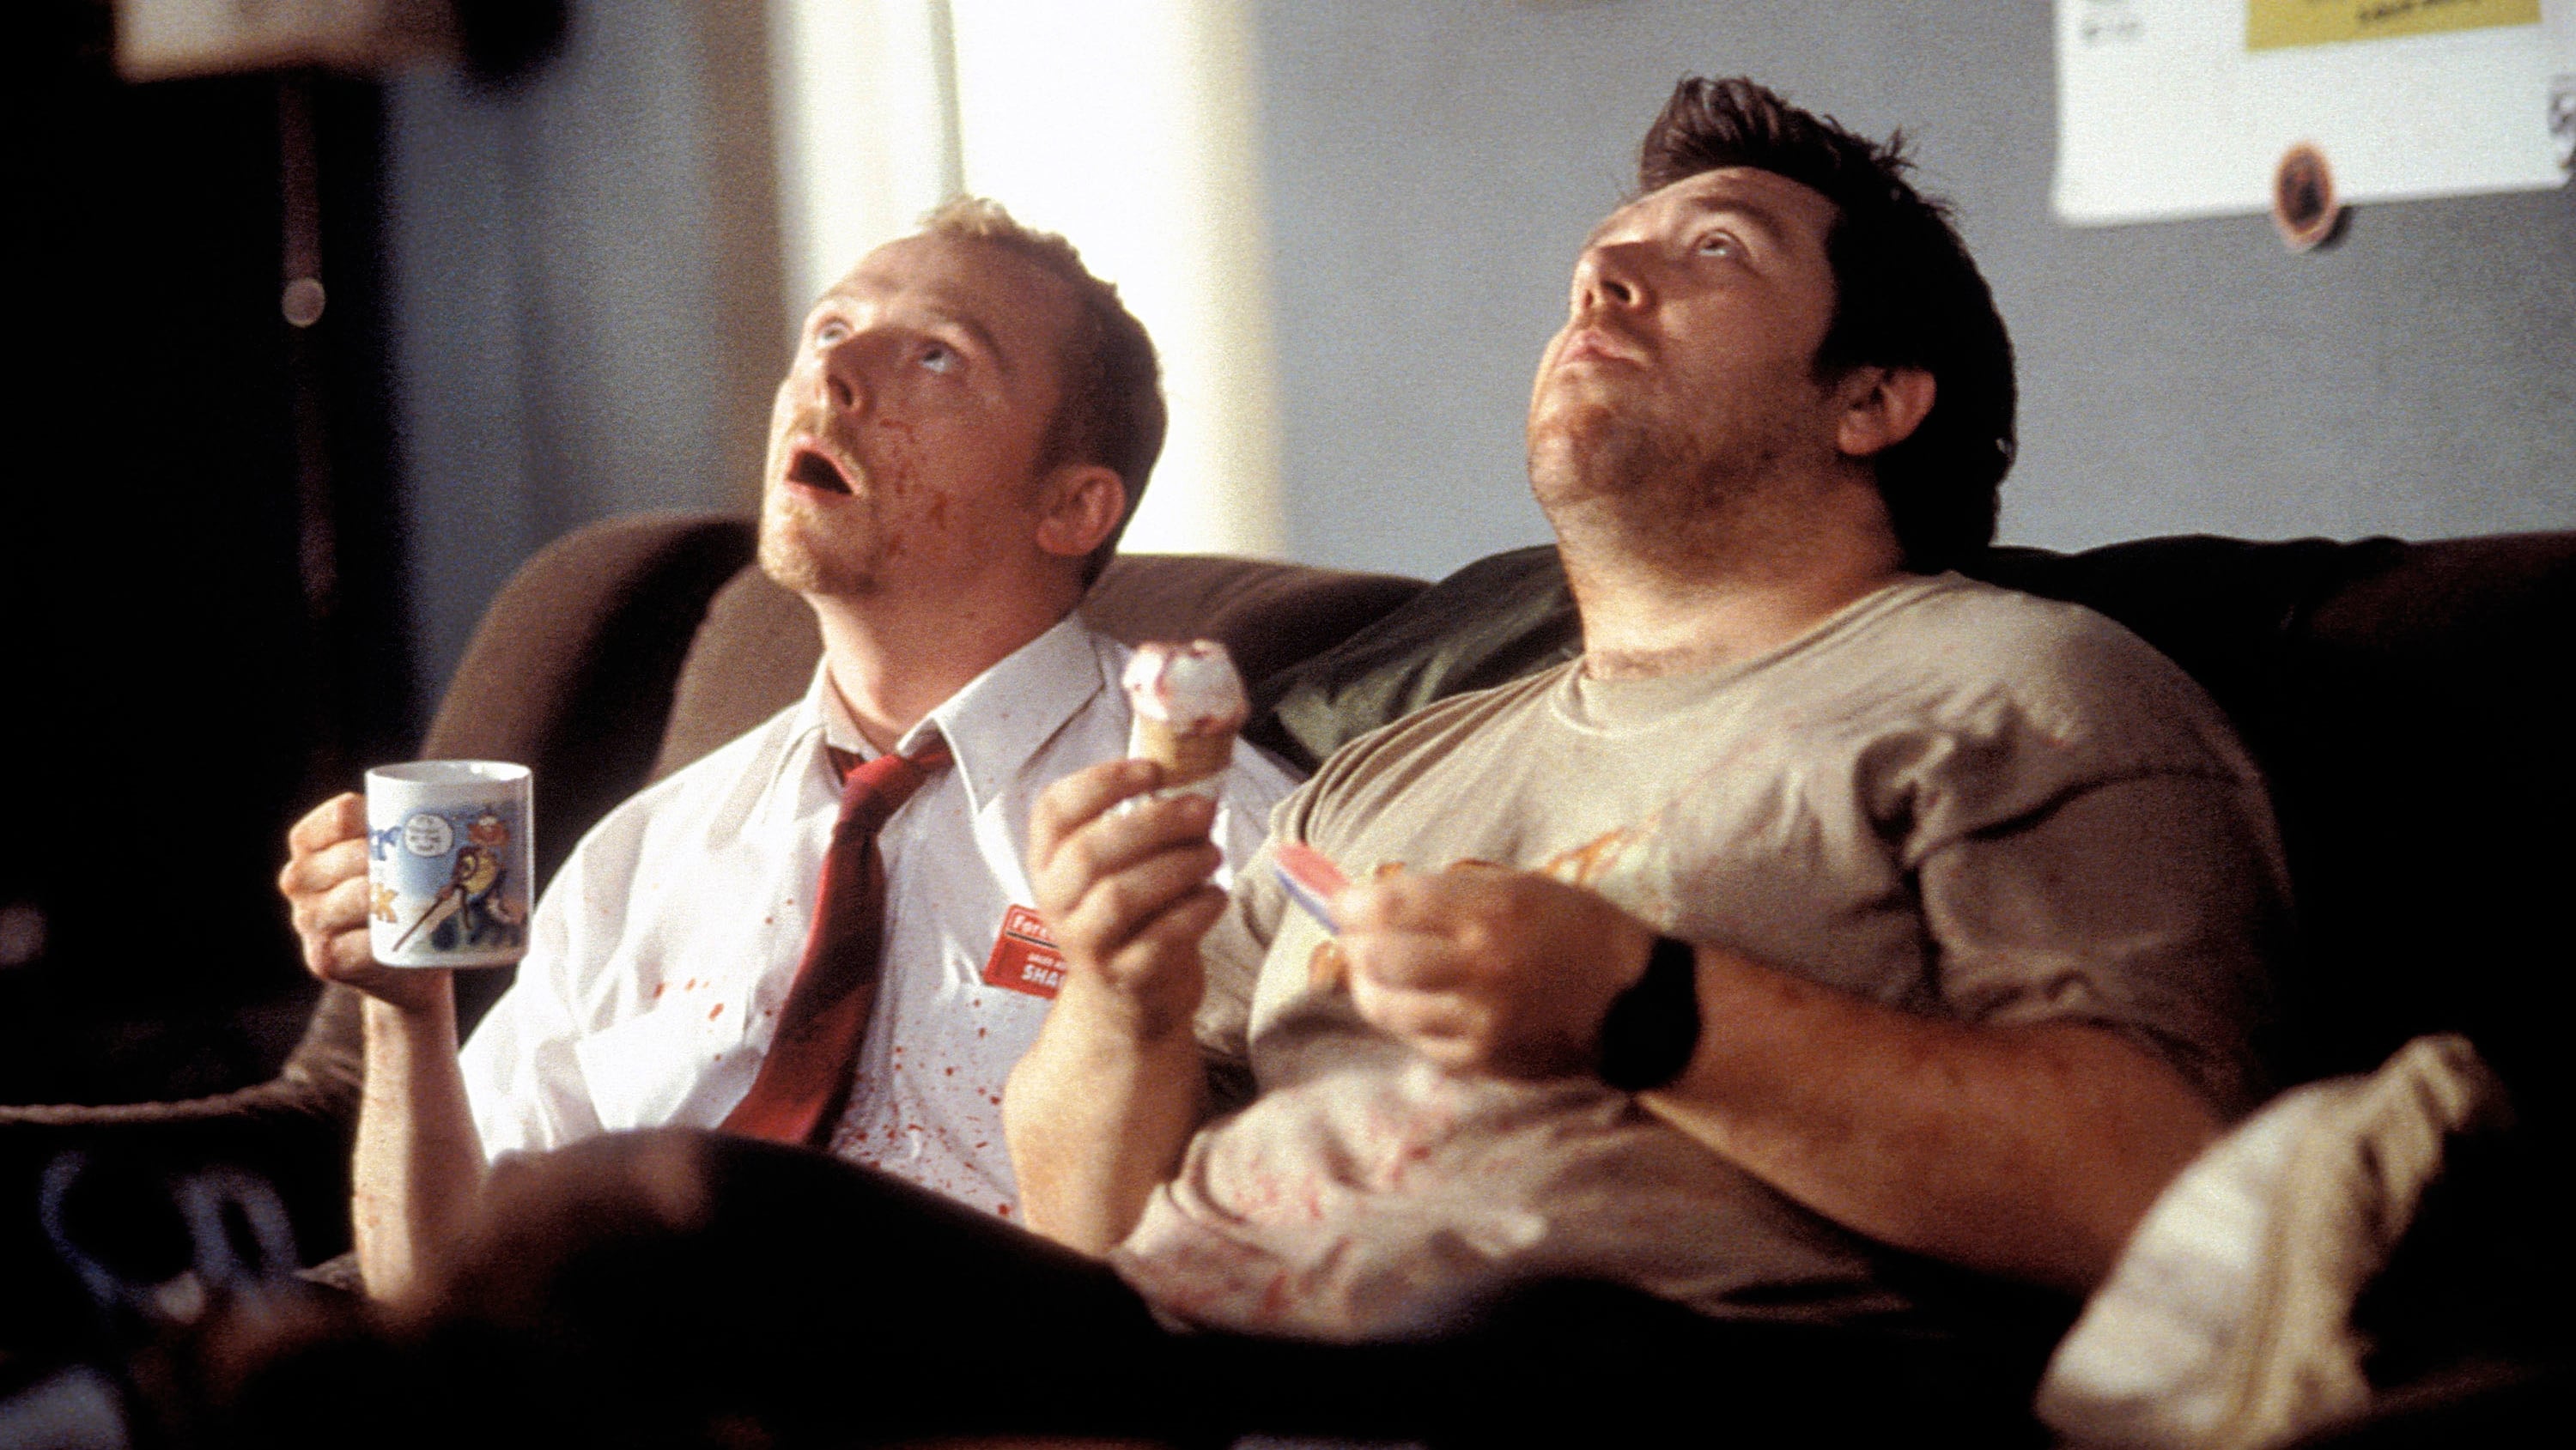 Screenshot from Shaun of the Dead. Two man with bloody clothes on look up at the ceiling with confused expressions on their face.